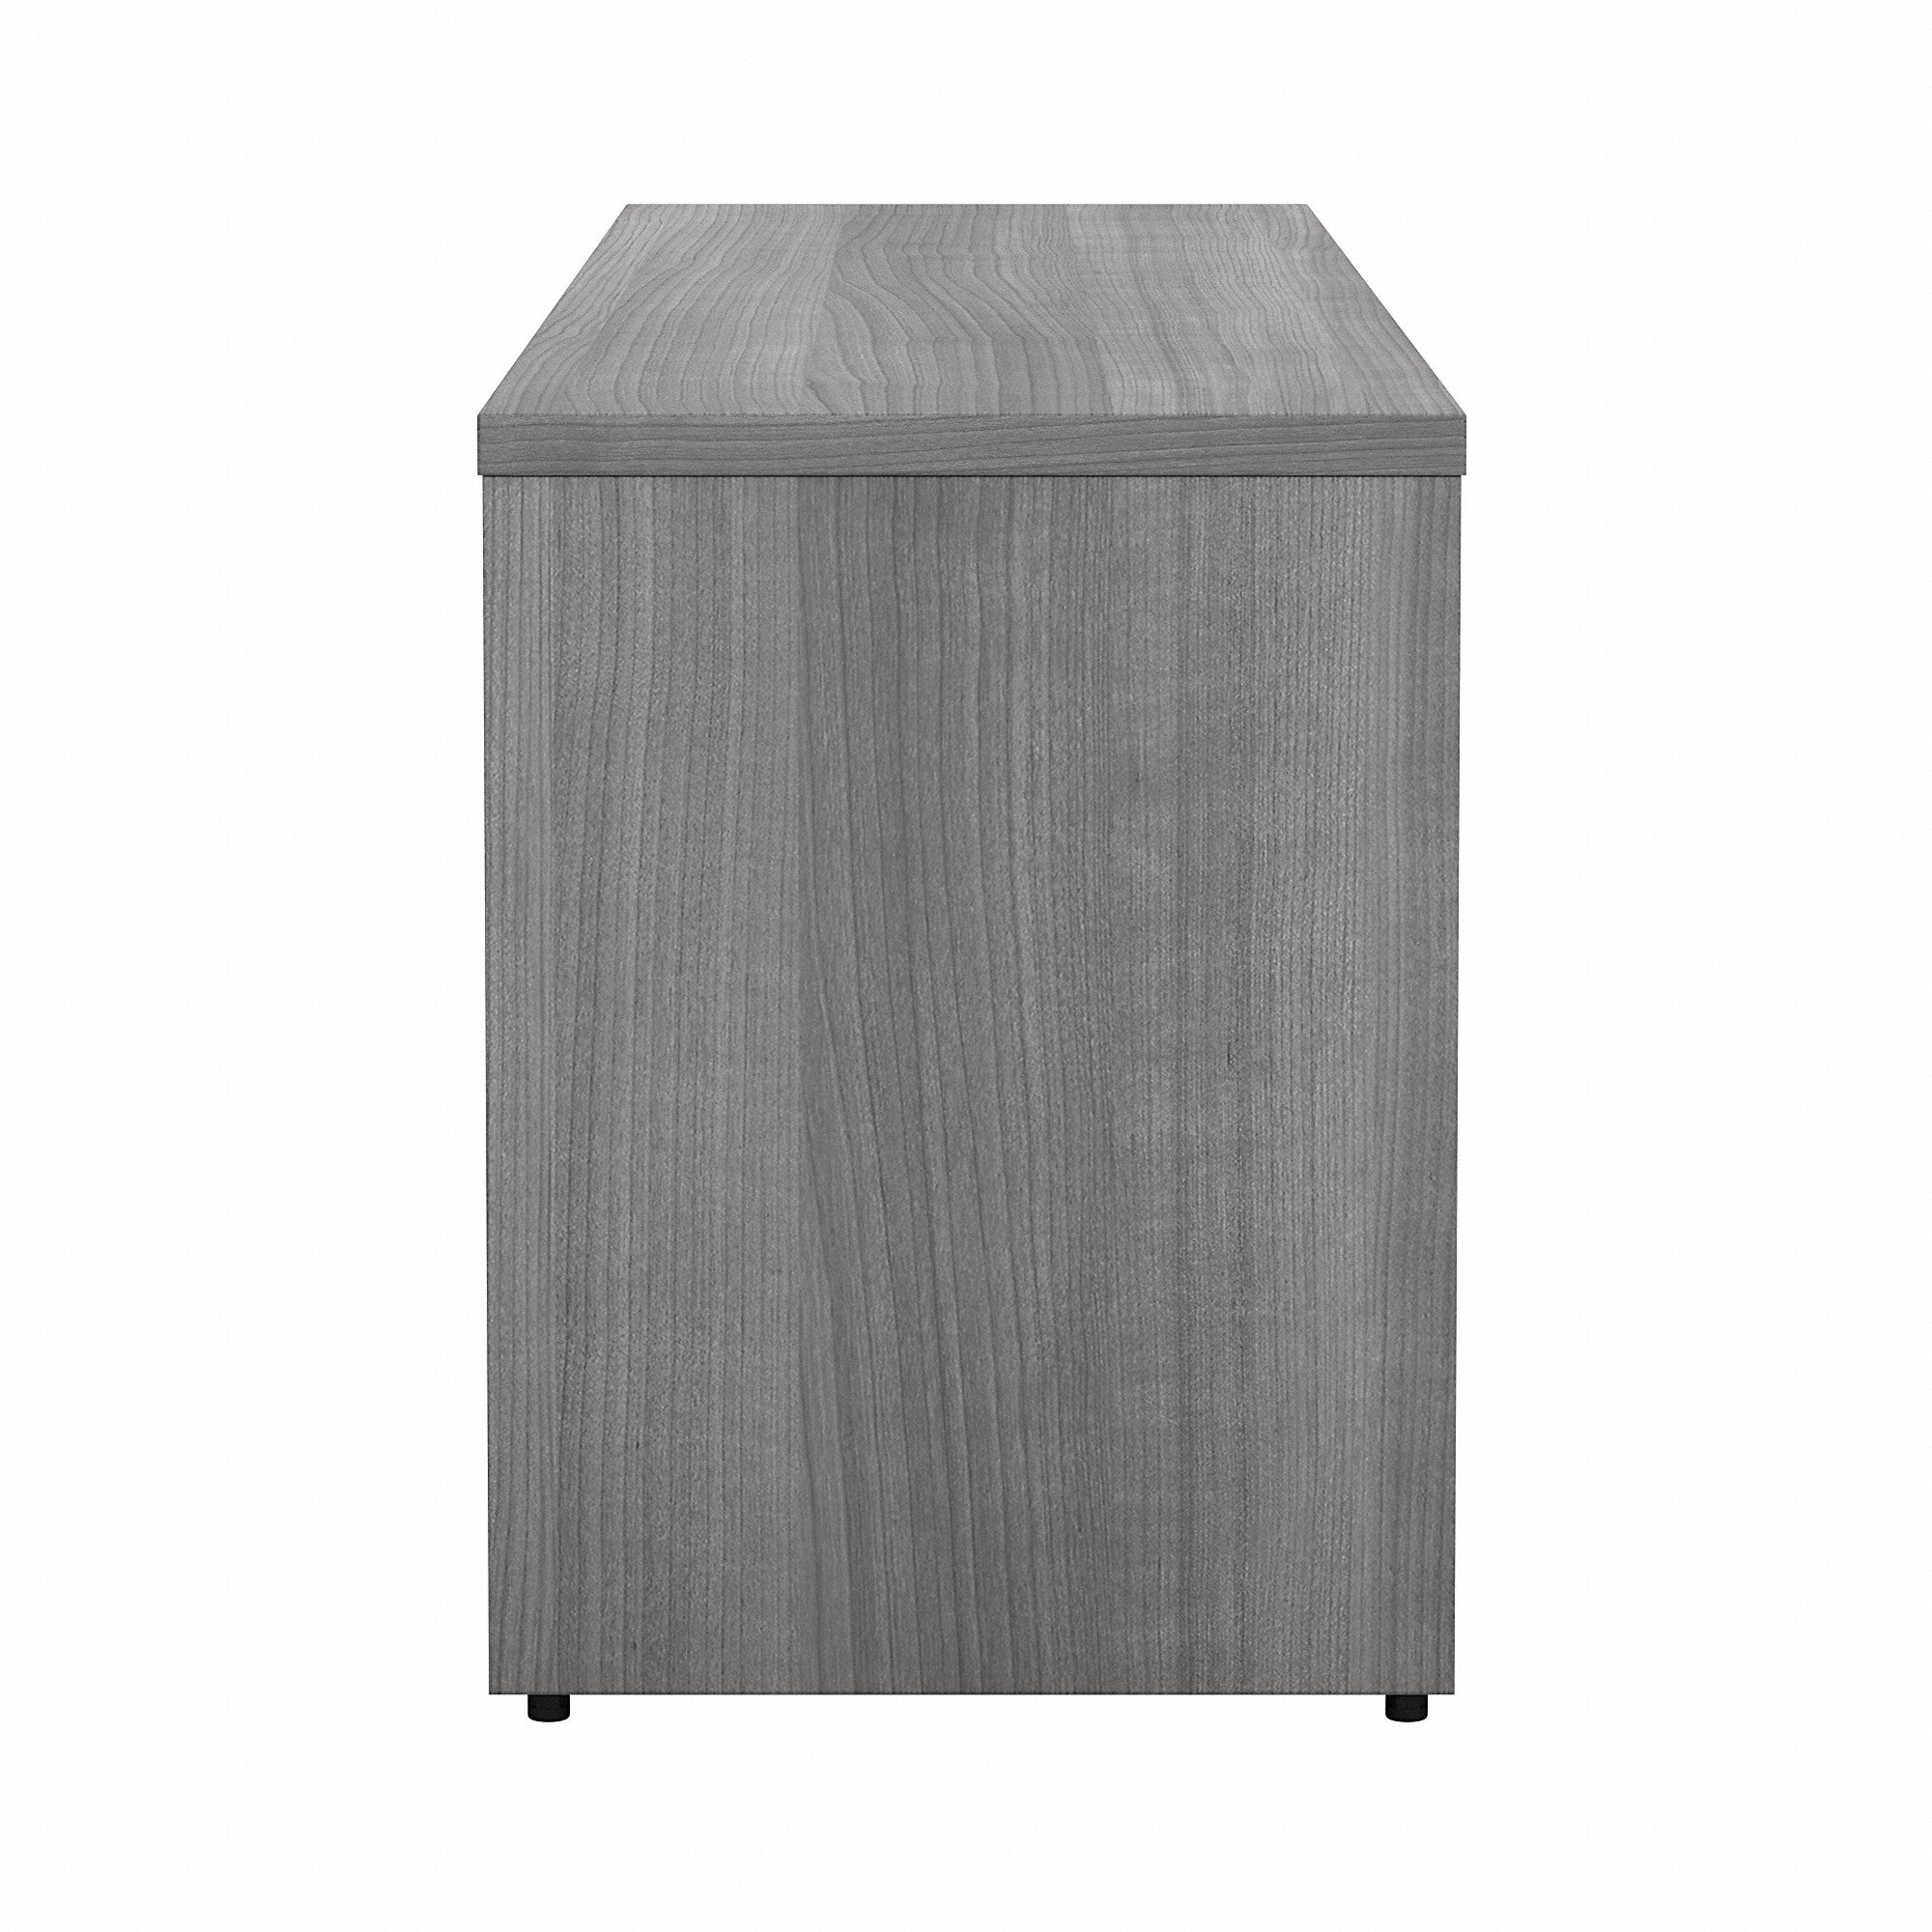 Bush Business Furniture Studio C Low Storage Cabinet with Doors and Shelves